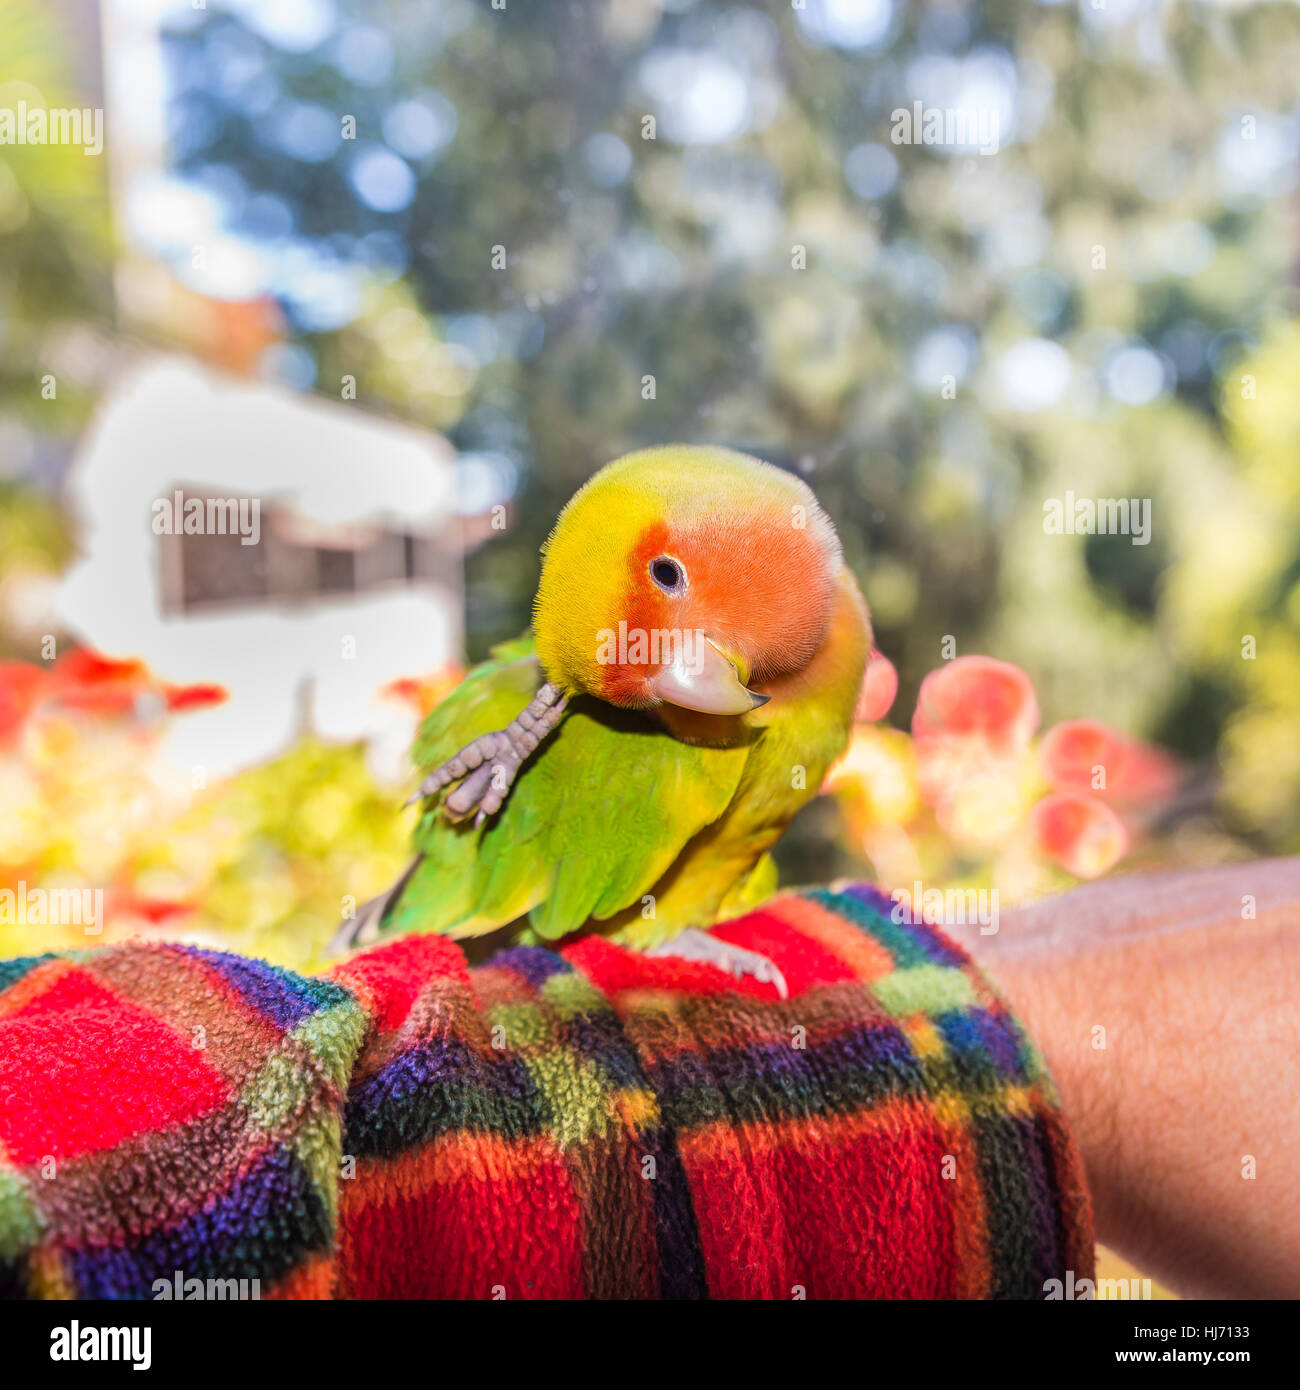 Colorful Agapornis roseicollis, also called lovebird parrot or peach faced, on the arm while he scratches Stock Photo